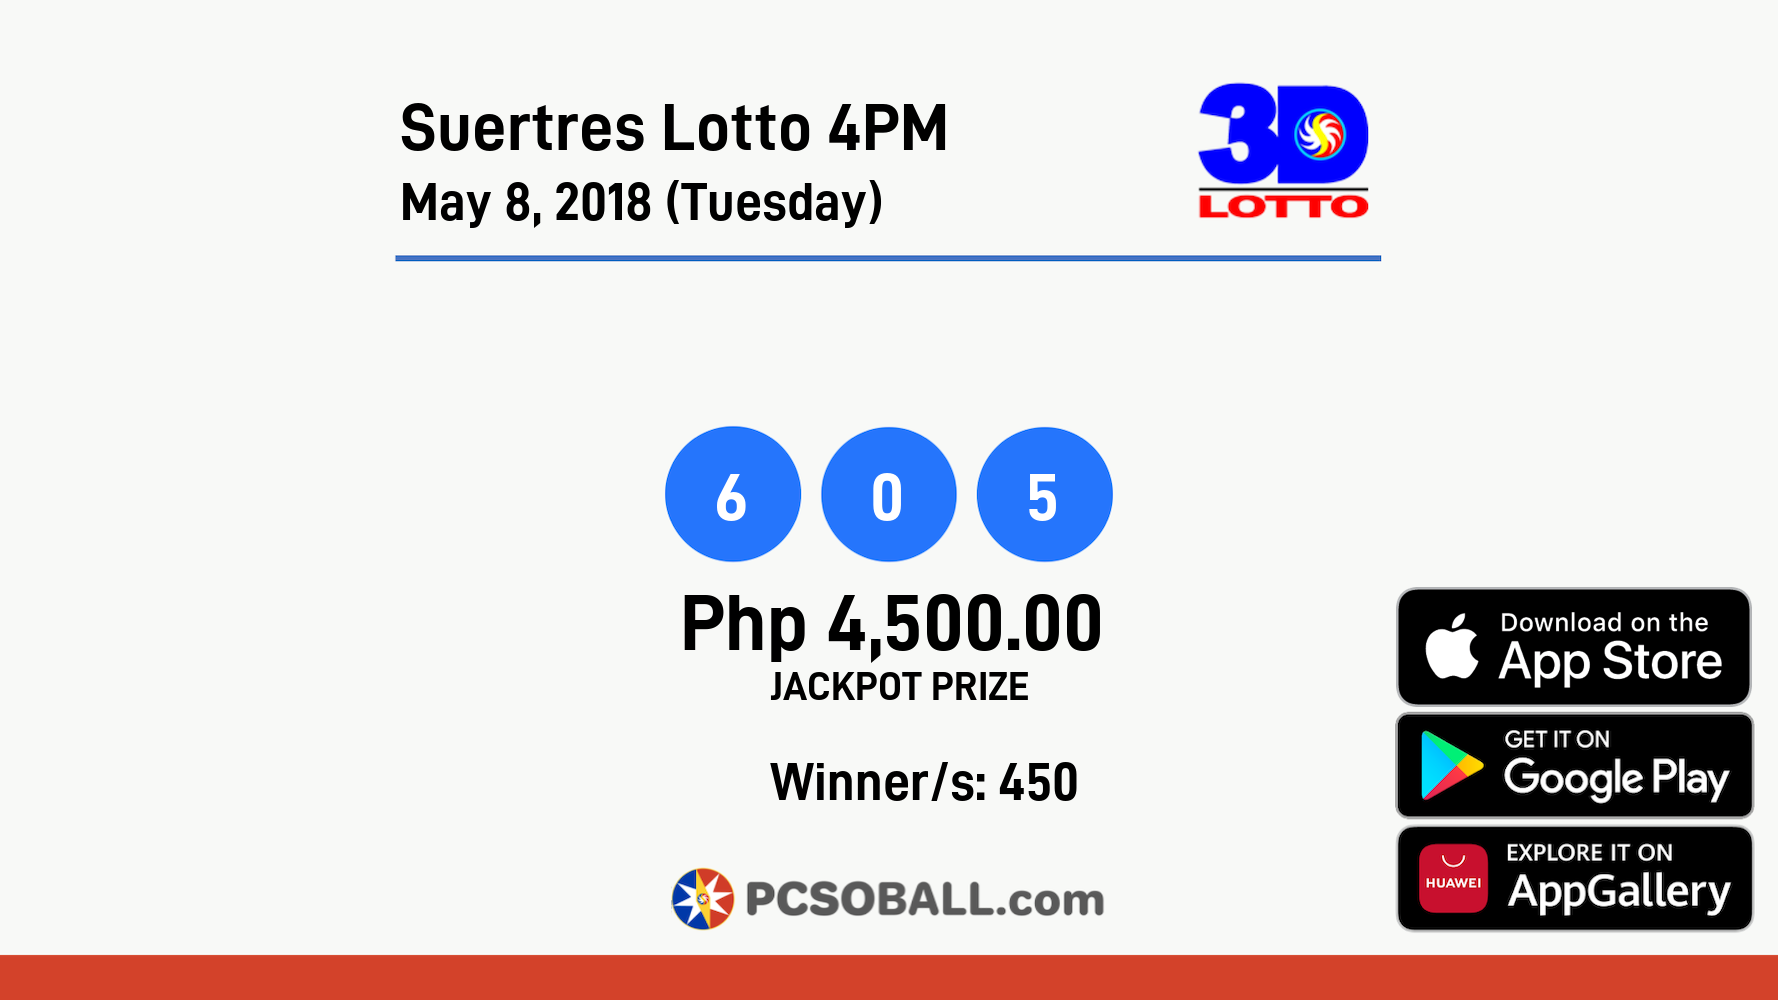 Suertres Lotto 4PM May 8, 2018 (Tuesday) Result